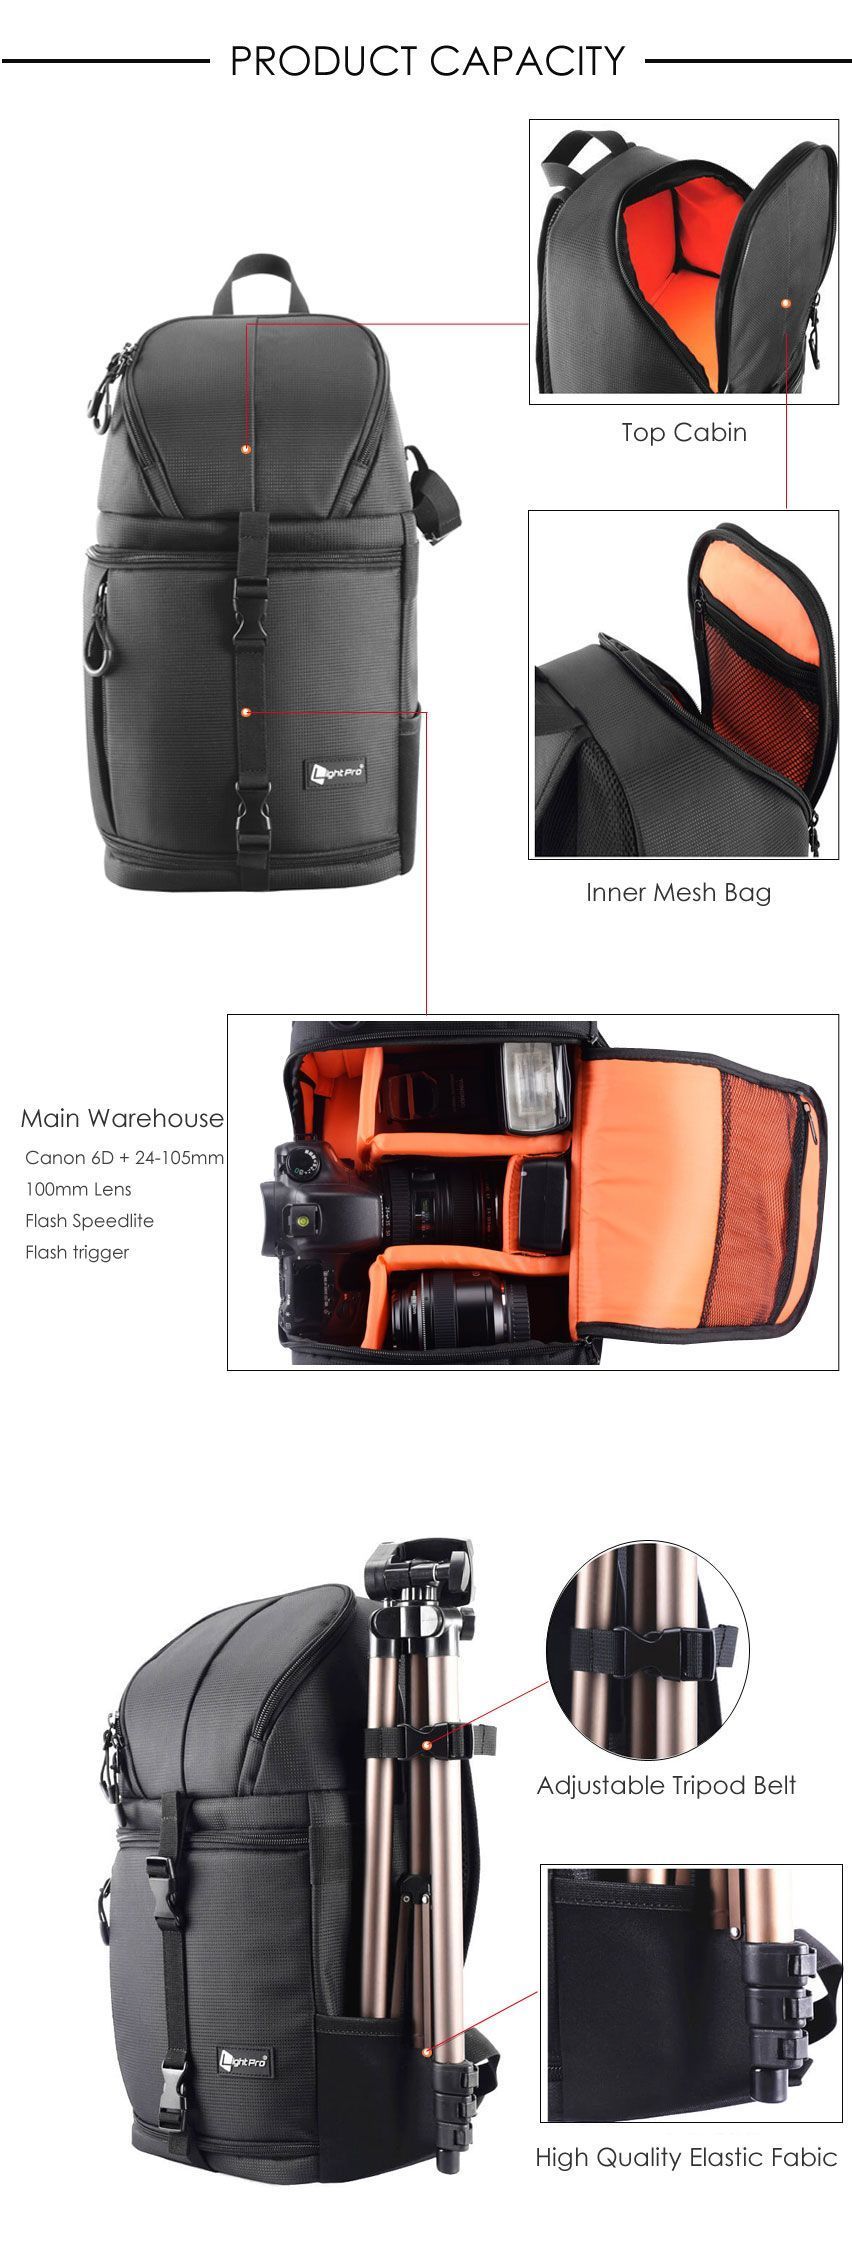 Light-Pro-Sling-Bag-Shoulder-Cross-Waterproof-Water-resistant-with-Rain-Cover-for-Canon-for-Nikon-fo-1599078